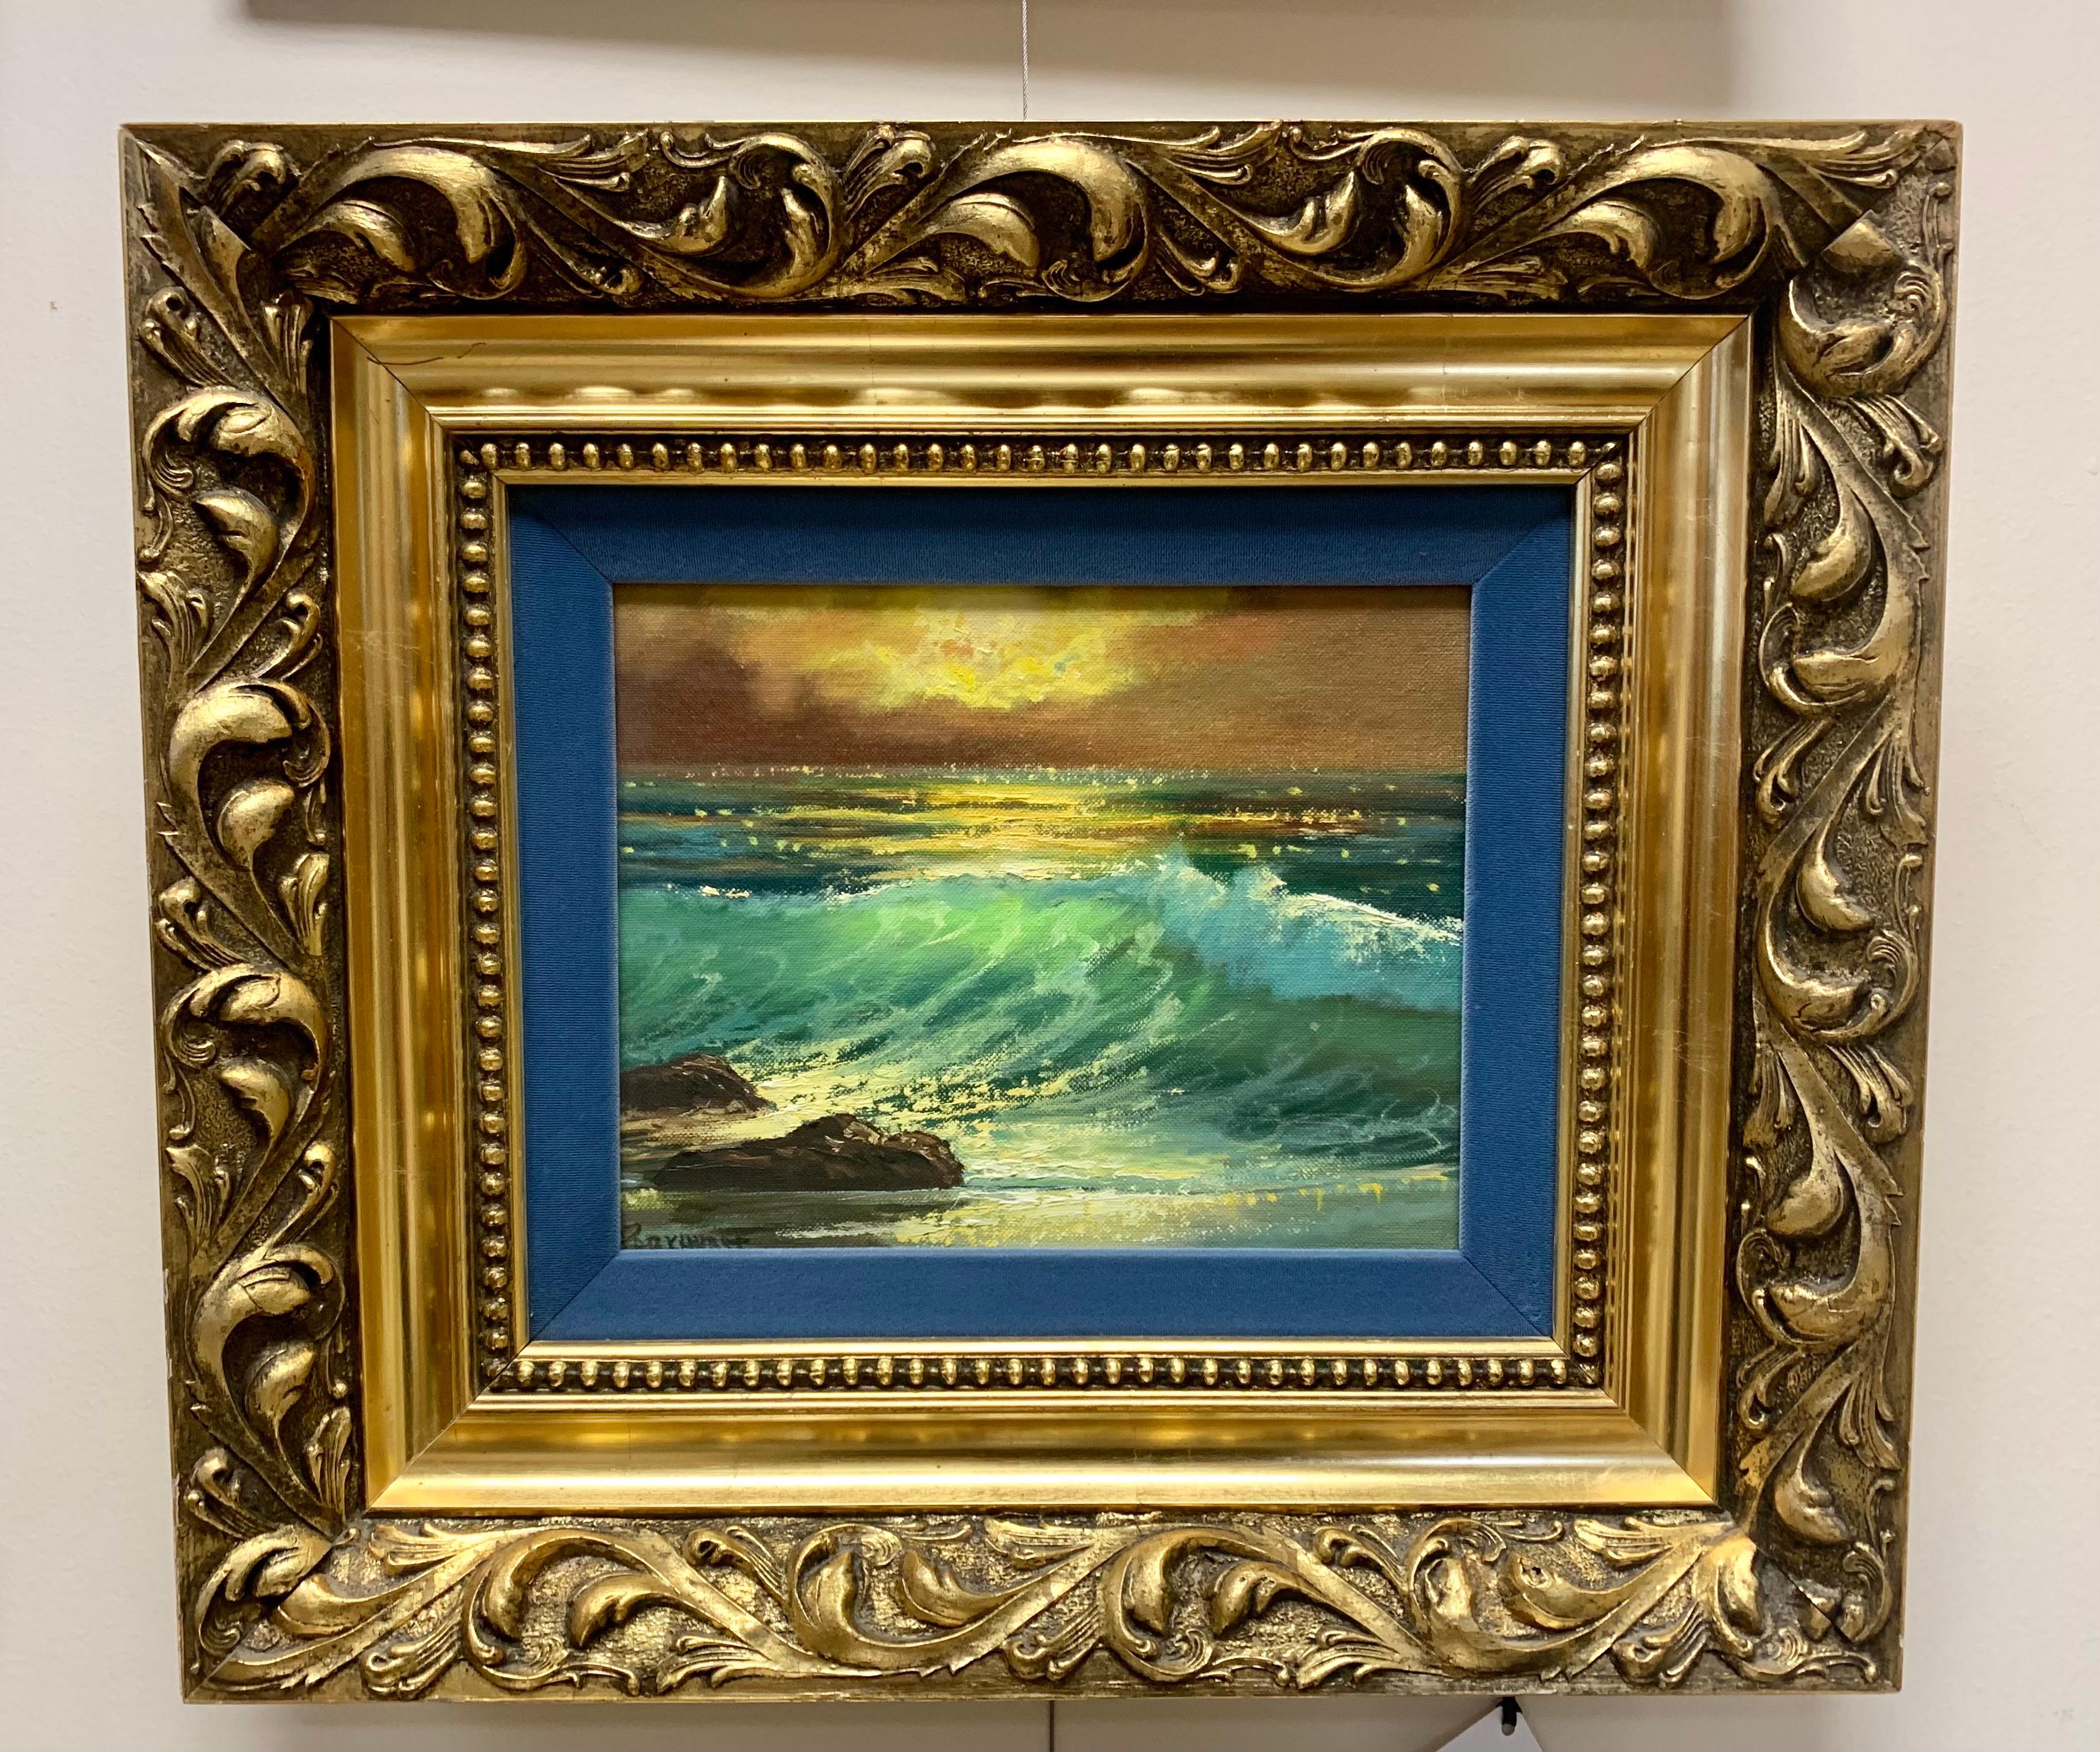 Signed seaside painting by Violet Parkhurst, a listed artist. Elegant frame. Medium is oil on canvas.
Great scale. Now, more than ever, home is where the heart is.